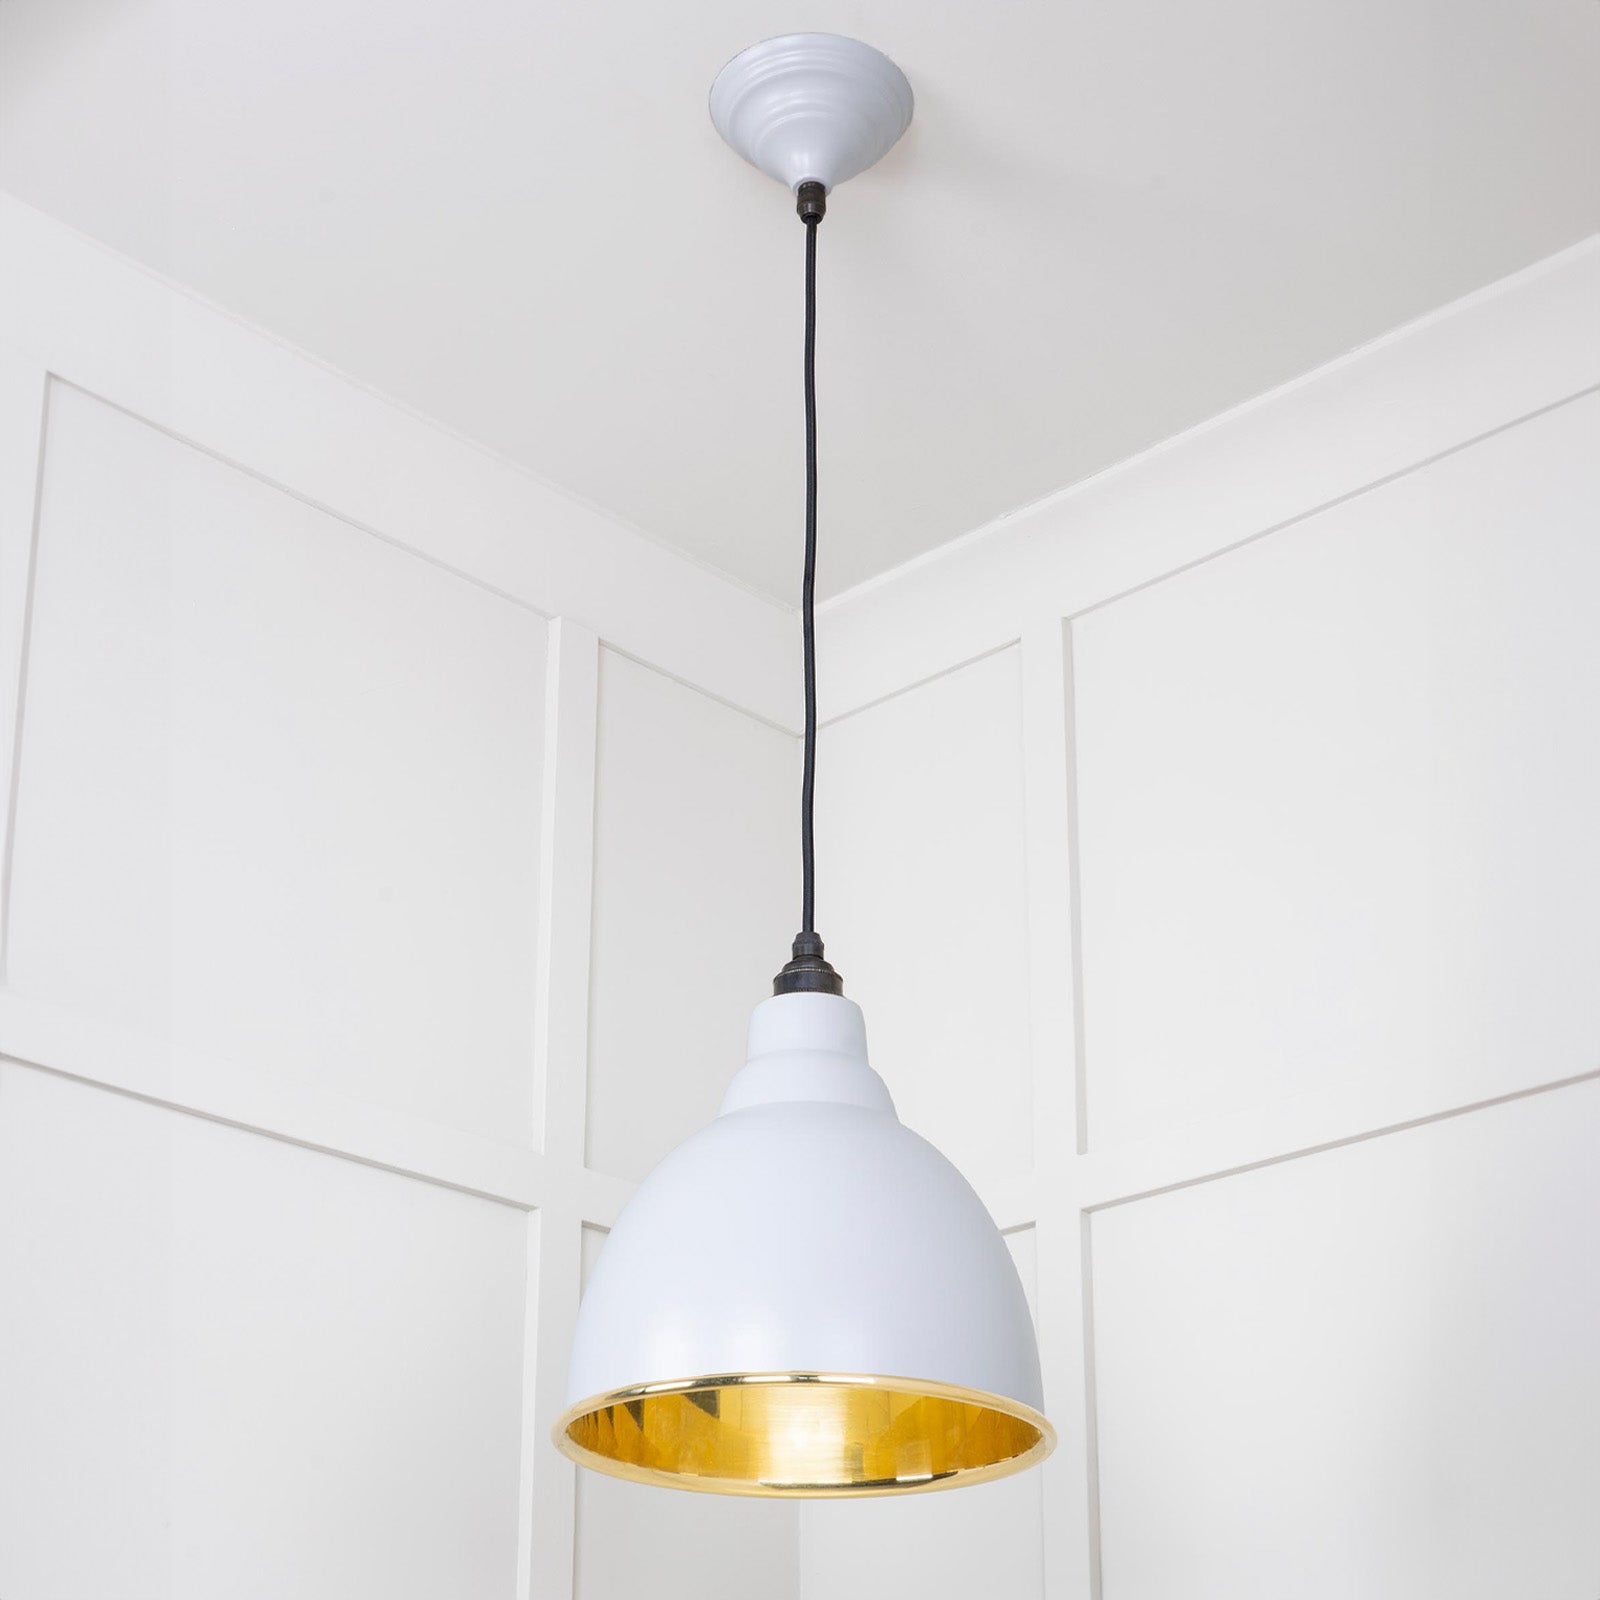 SHOW Full Image of Hanging Brindley Ceiling Light in Birch